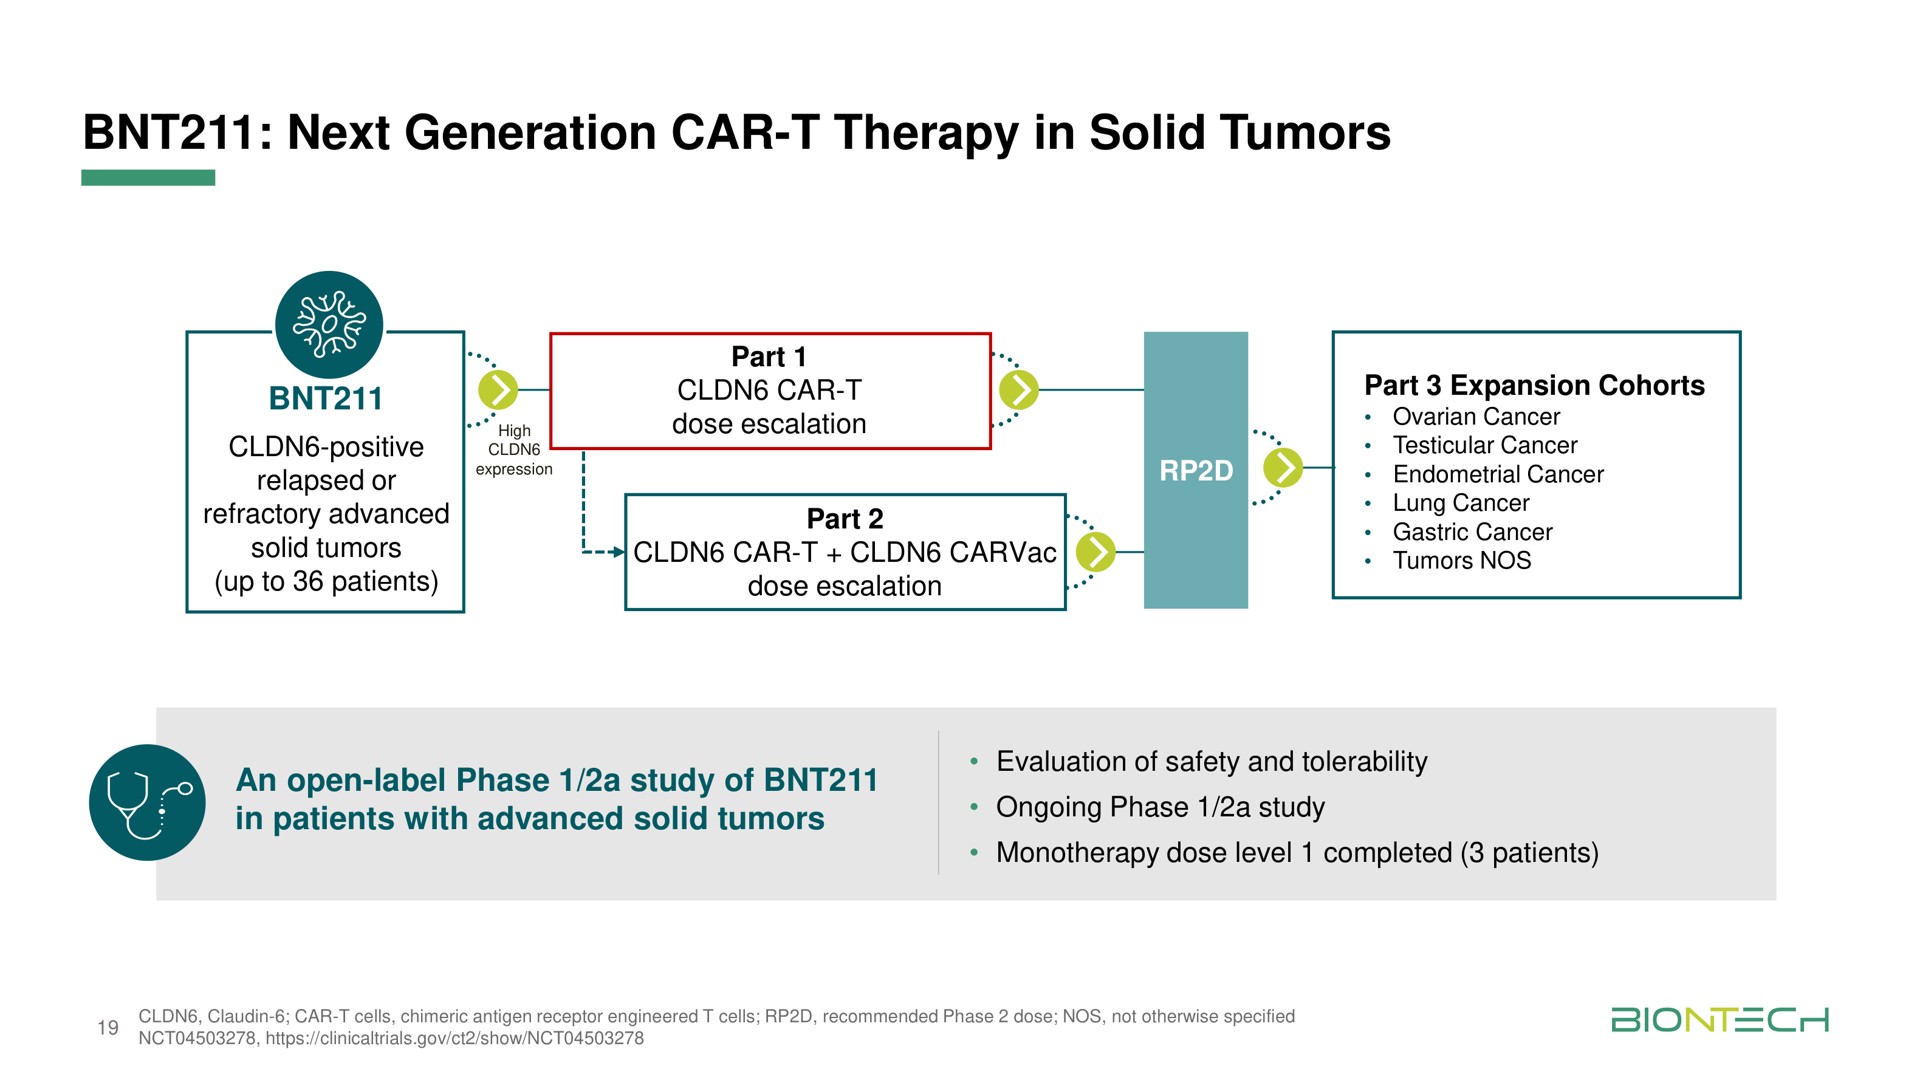 next generation car therapy in solid tumors | BioNTech